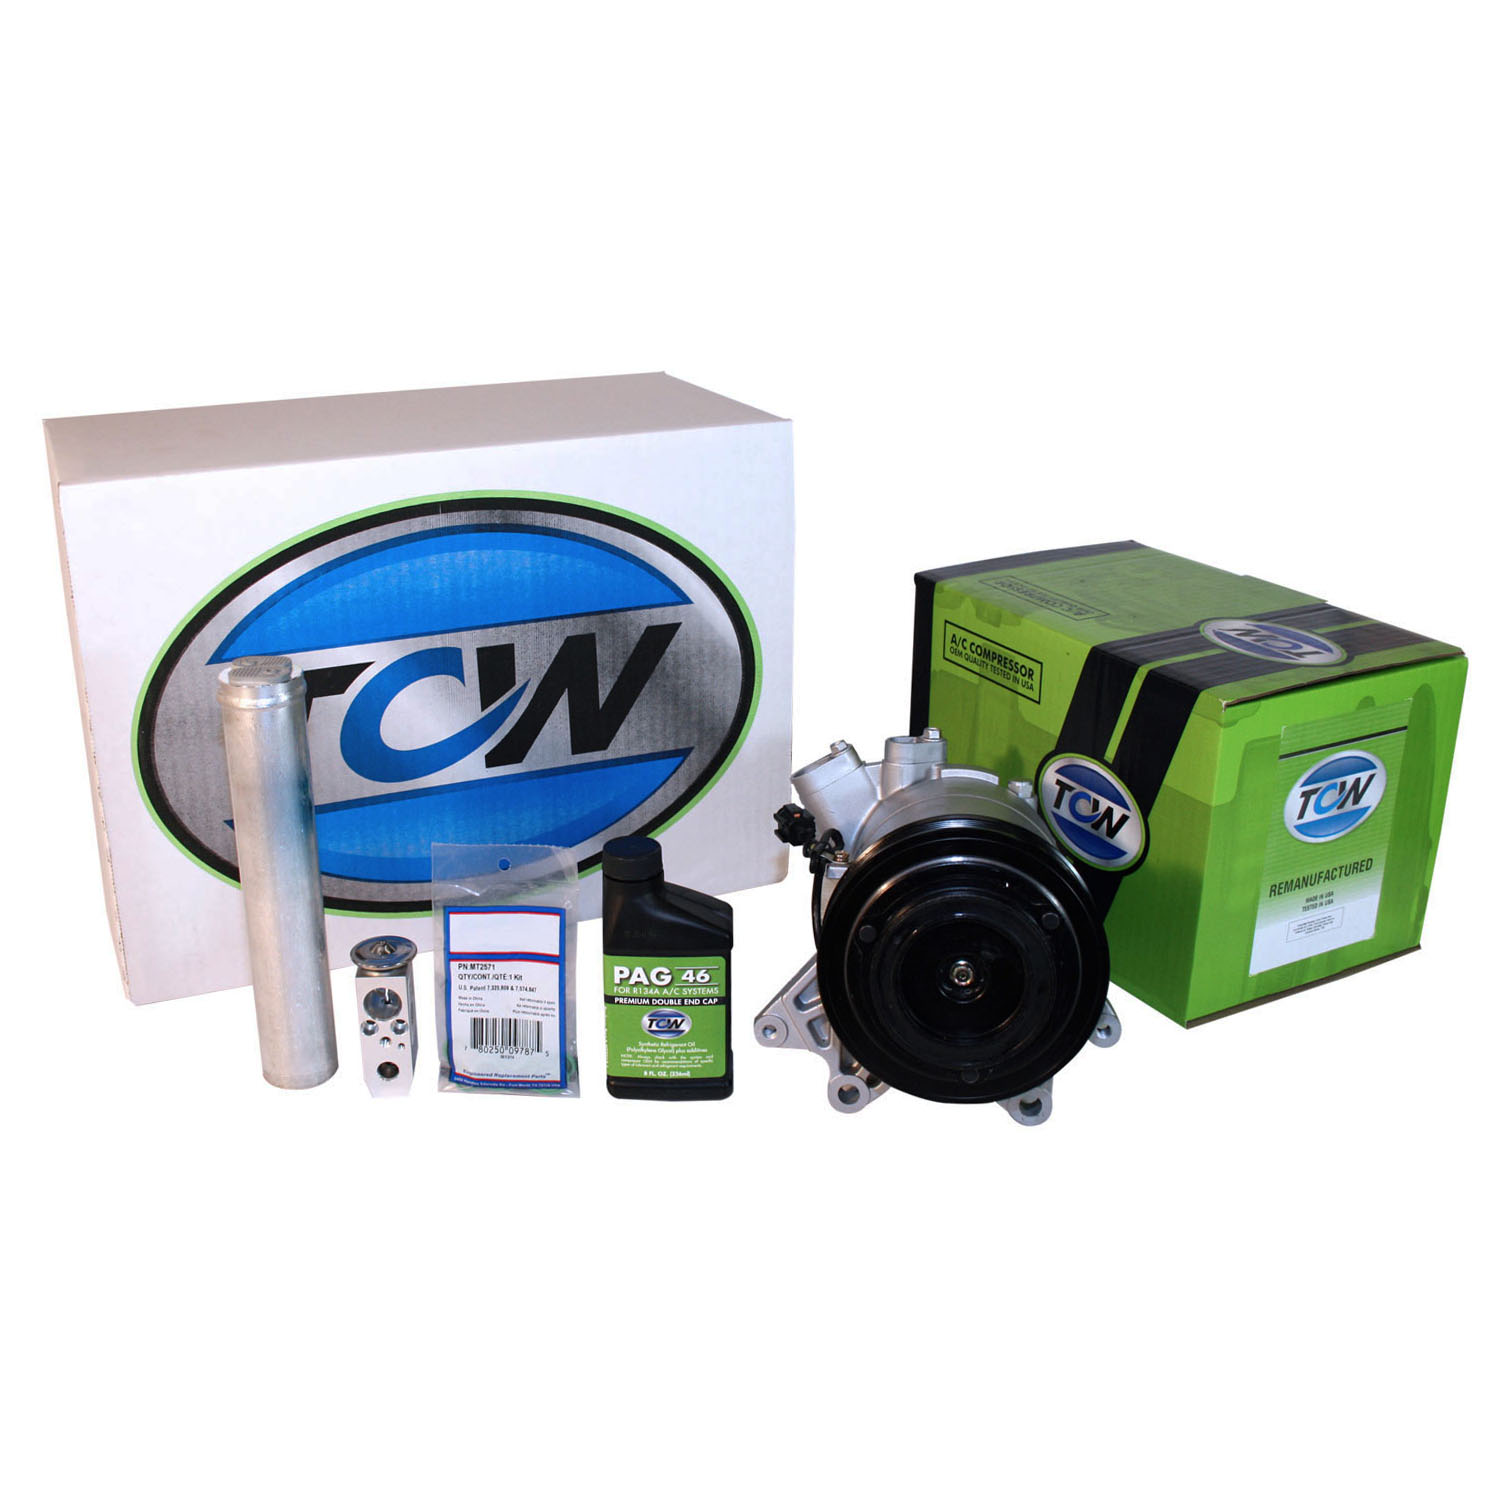 TCW Vehicle A/C Kit K1000344R Remanufactured Product Image field_60b6a13a6e67c